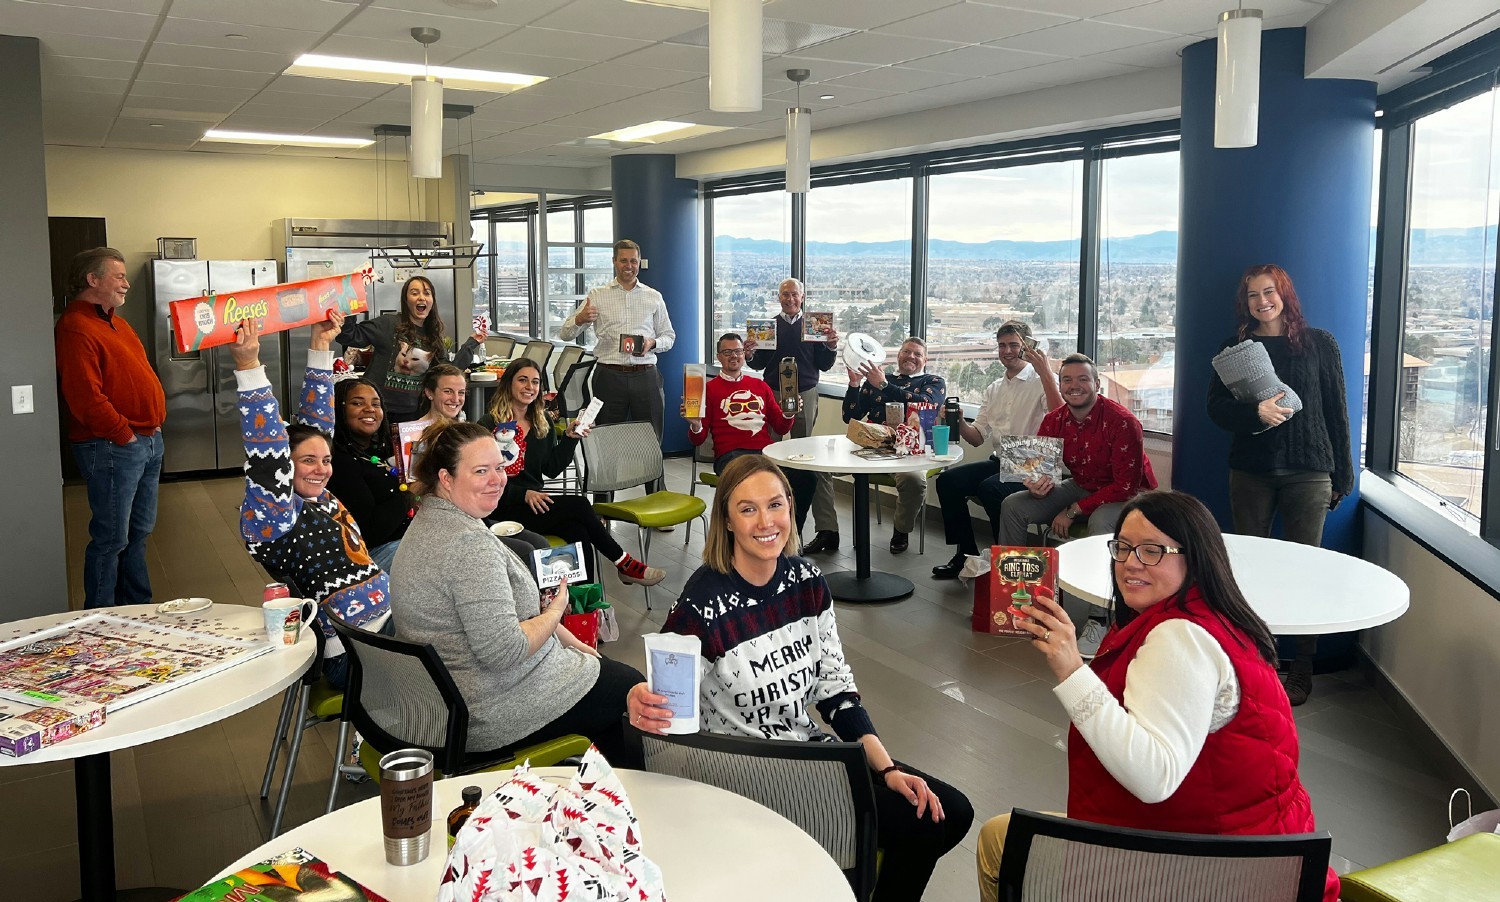 CHRISTMAS IS ALWAYS A FARNSWORTH GROUP FAVORITE AS GROUPS PARTICIPATE IN THE WHITE ELEPHANT GIFT EXCHANGE. 